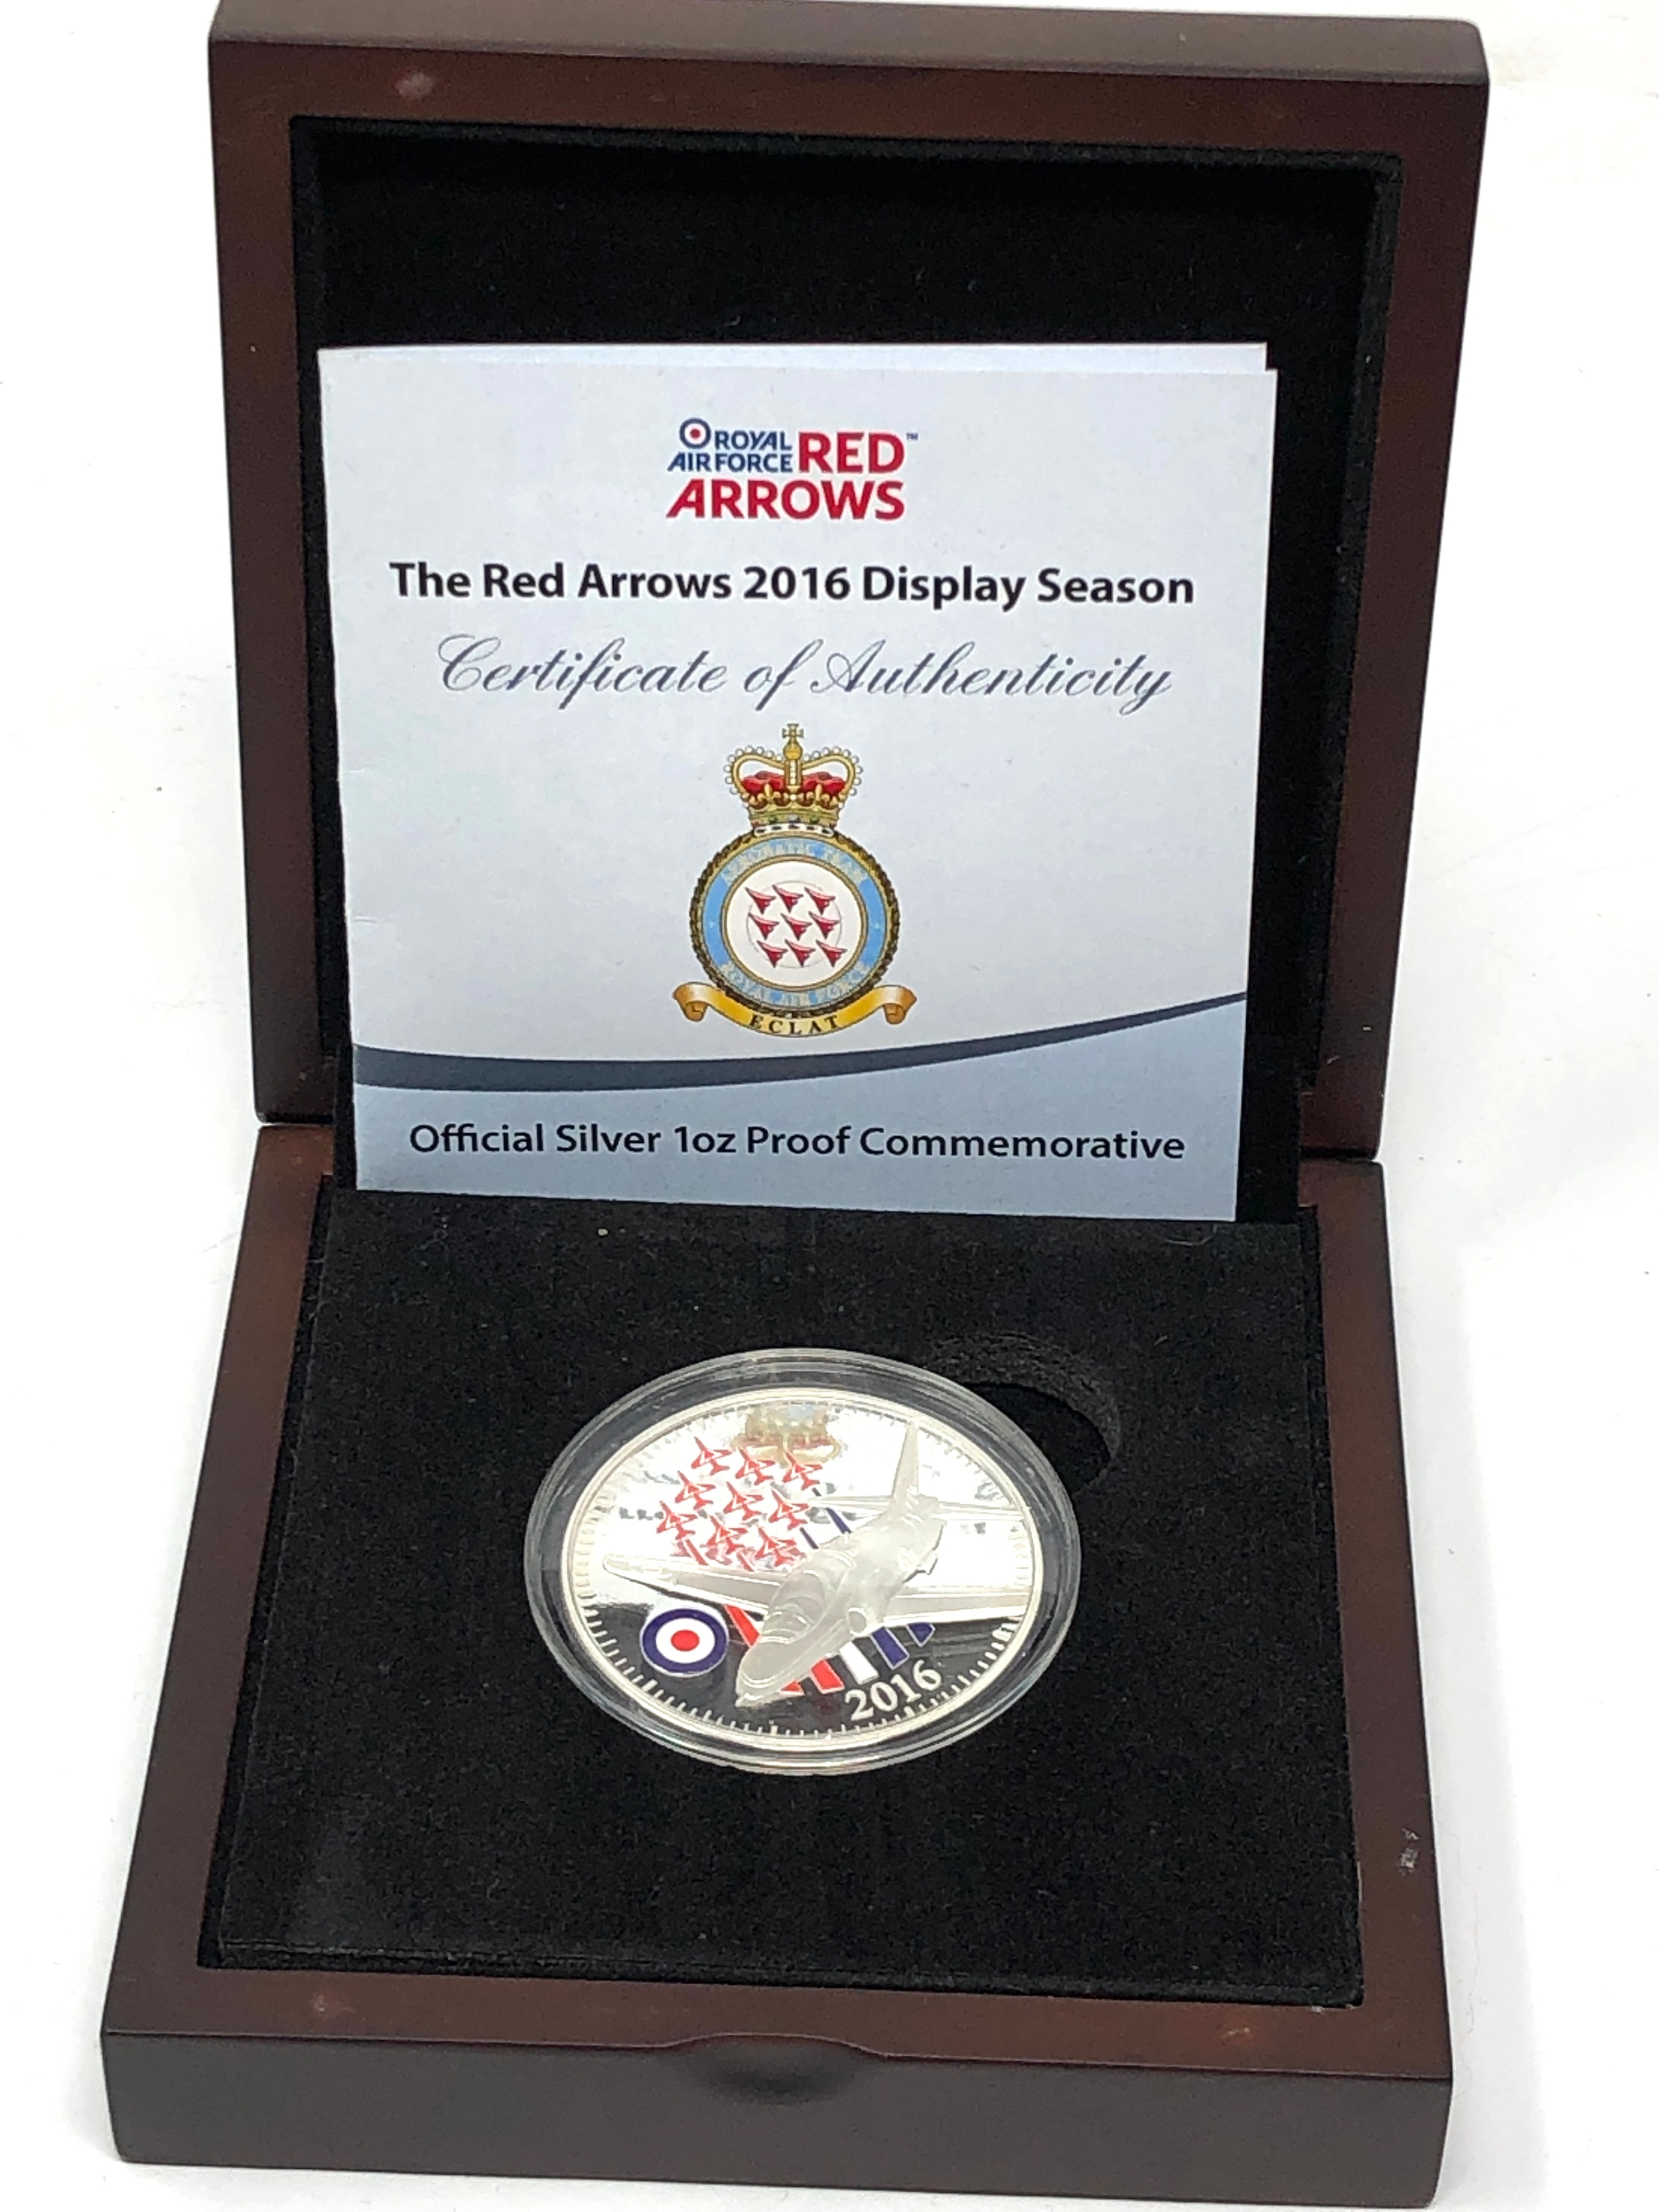 Boxed 1oz proof 999 silver red arrows 2016 display season squadron coin limited edition No 0872